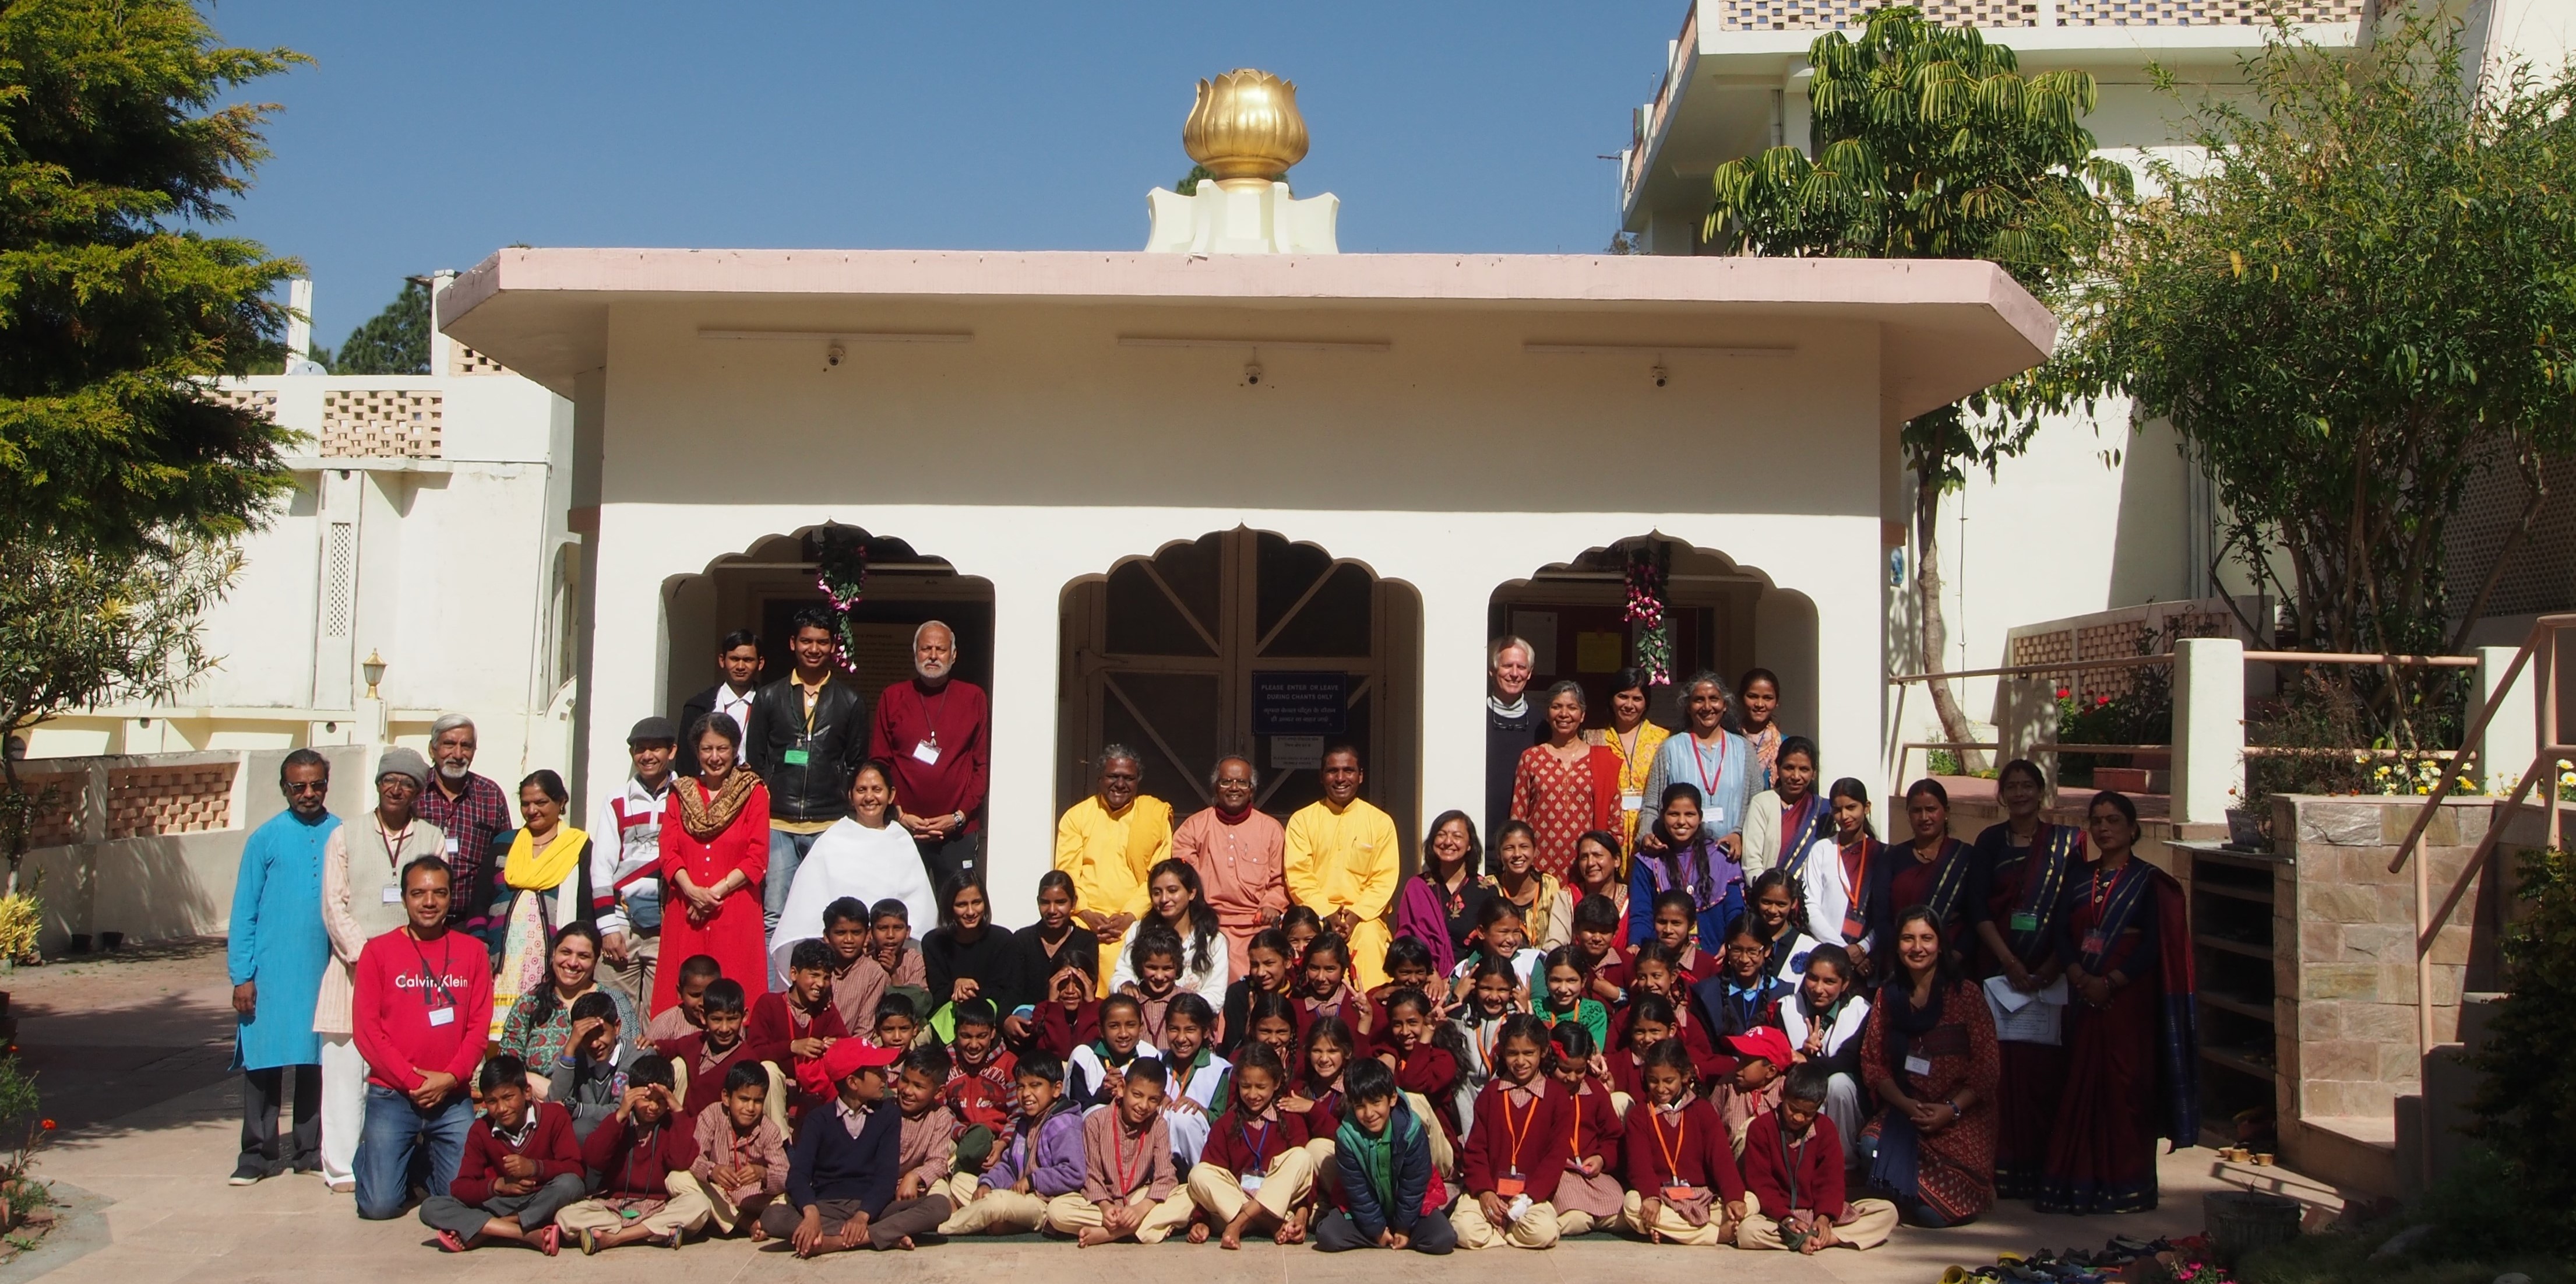 YSS Dwarahat Ashram conducts a 'How-to-Live' Children's Camp